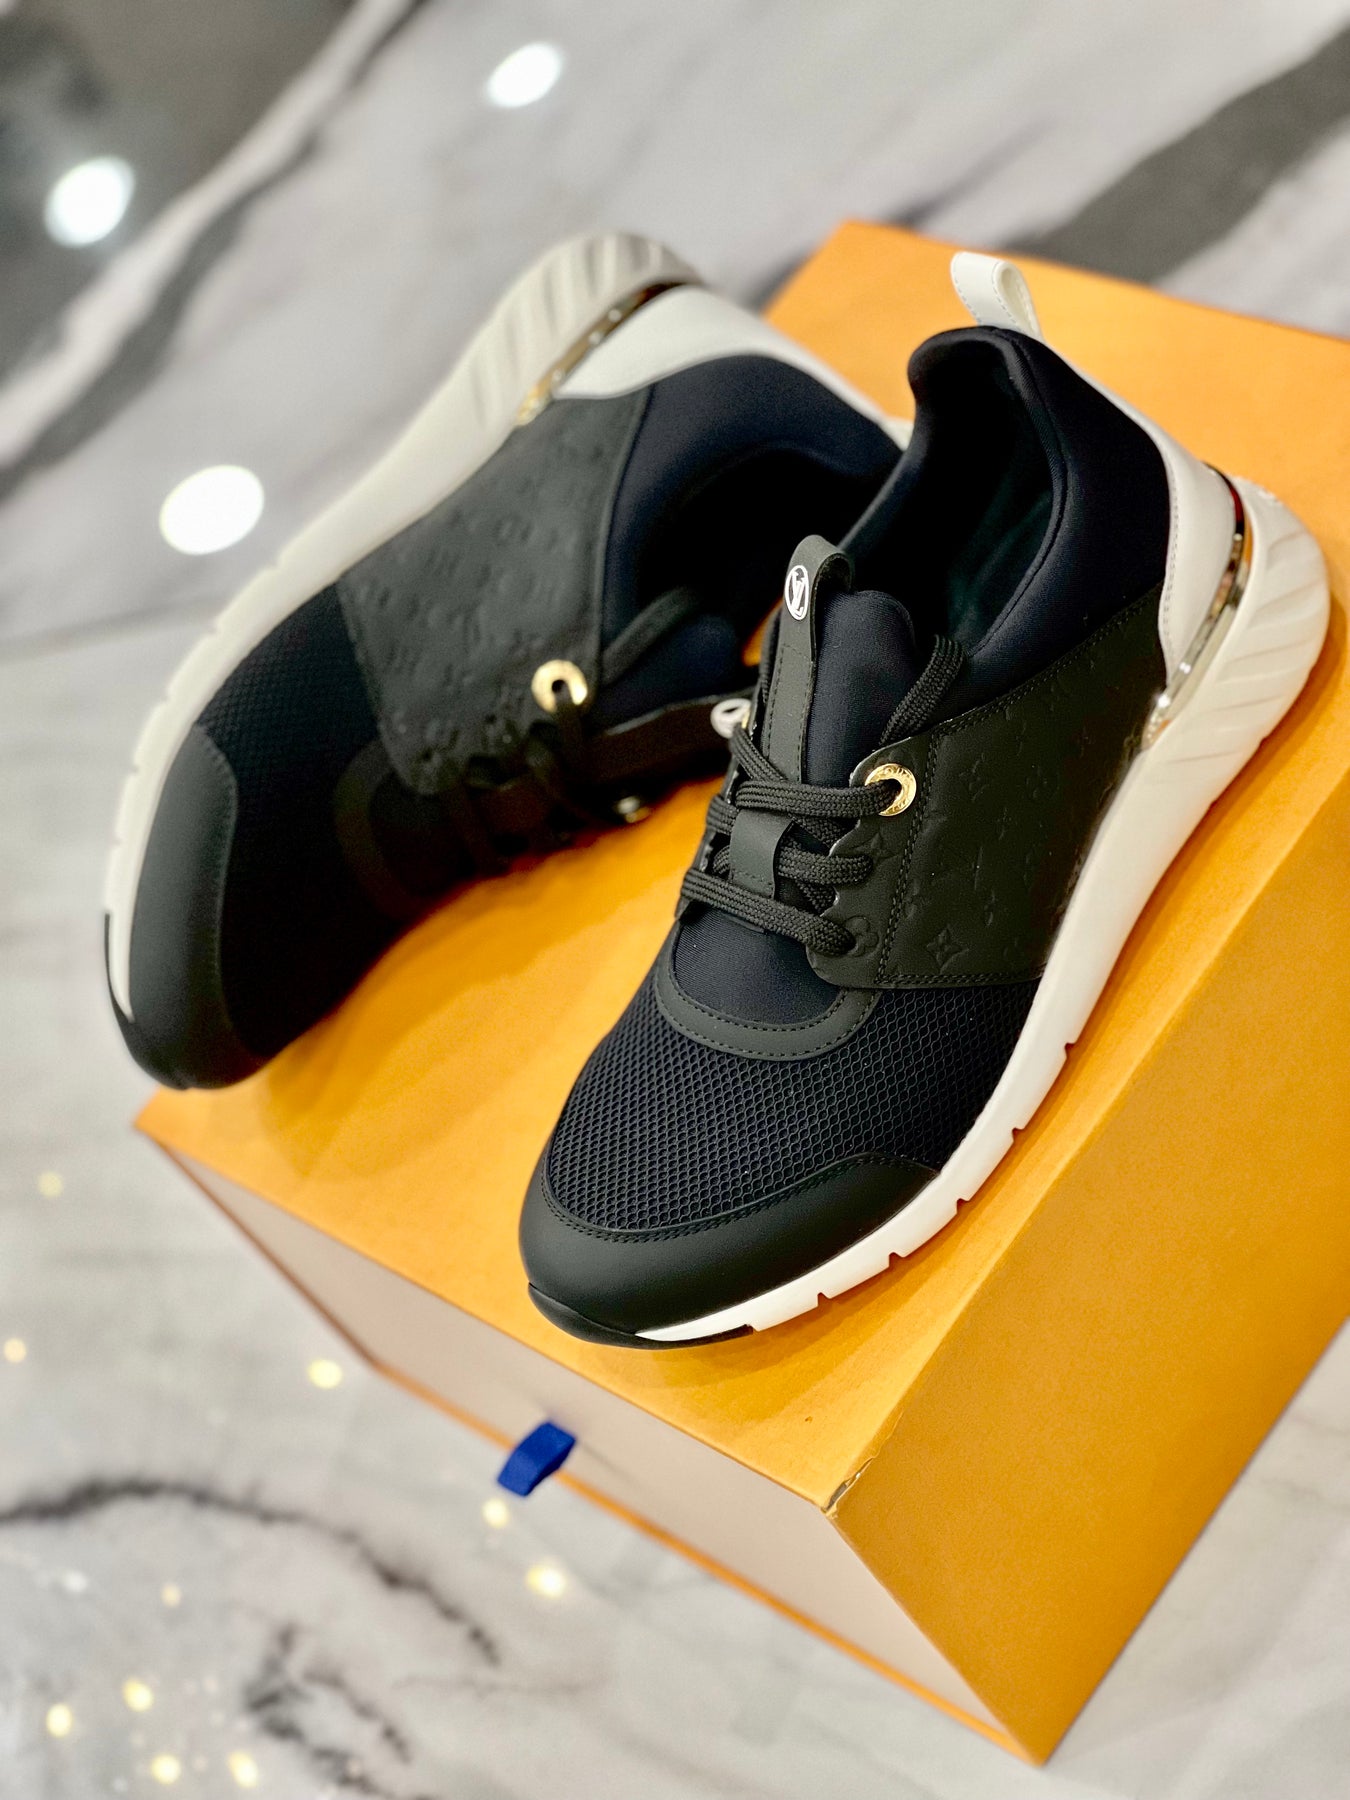 LOUIS VUITTON AFTERGAME MONOGRAM SNEAKERS